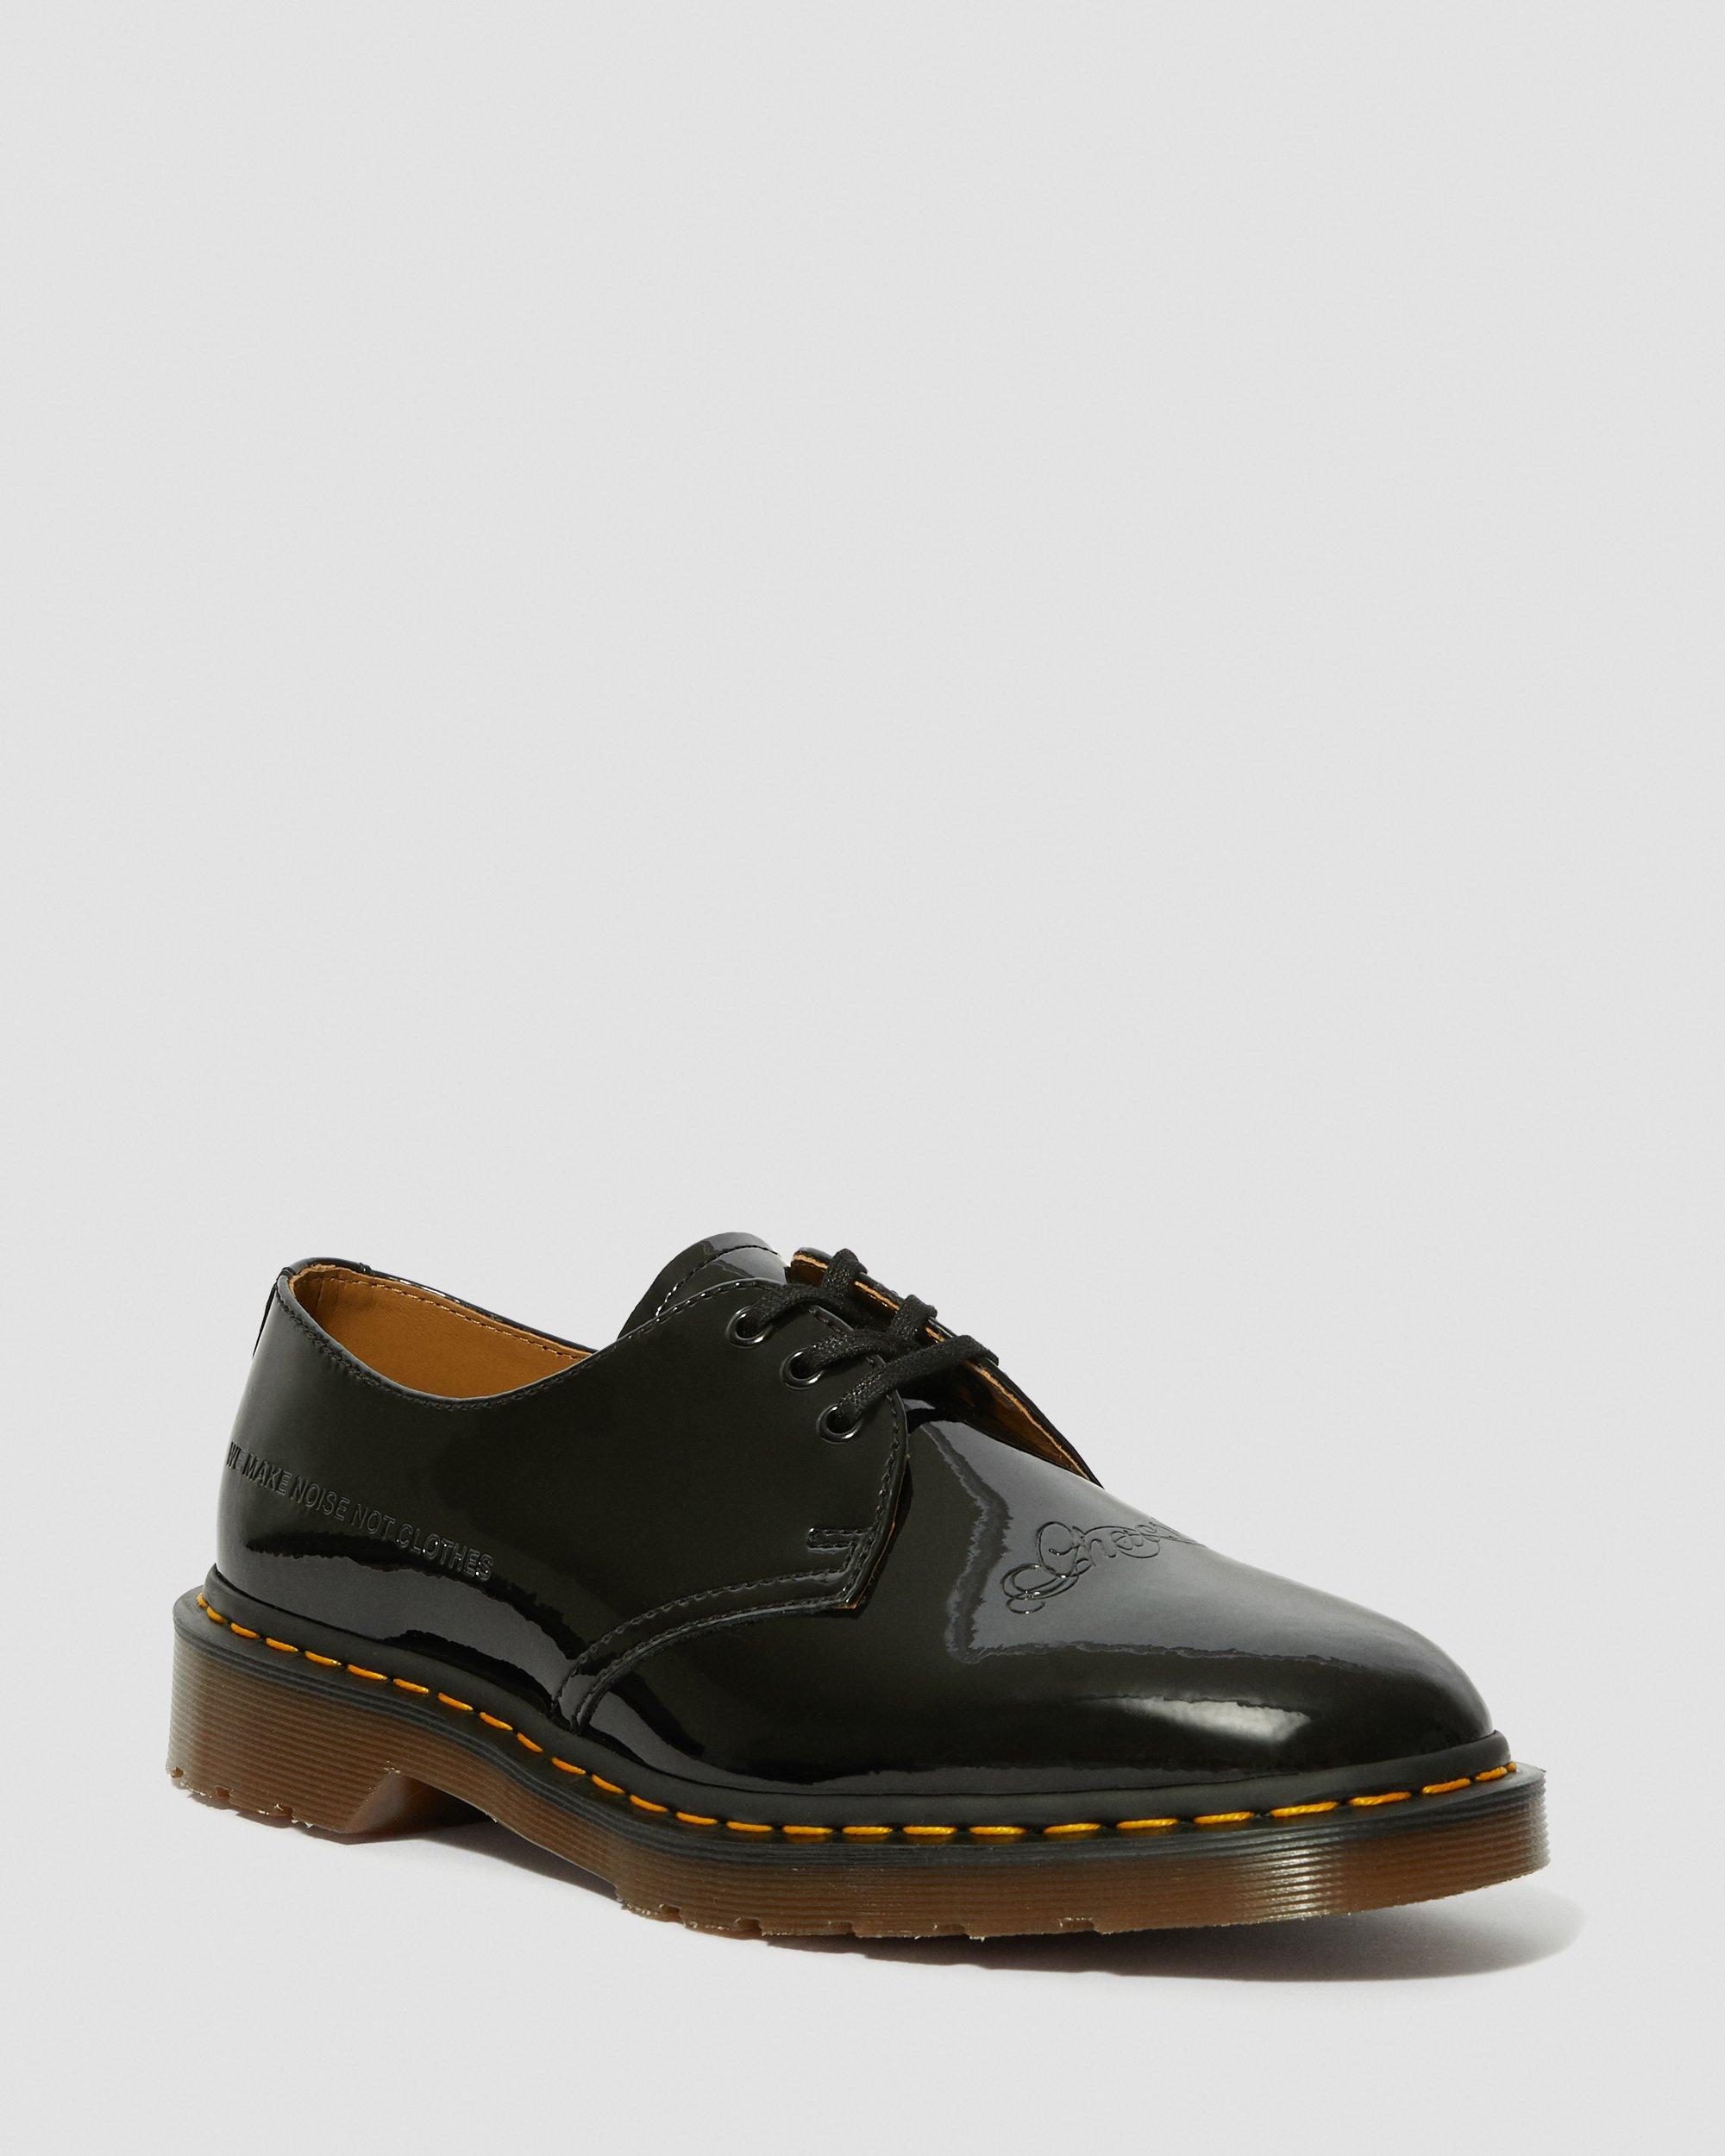 1461 UNDERCOVER PATENT LEATHER SHOES | Dr. Martens